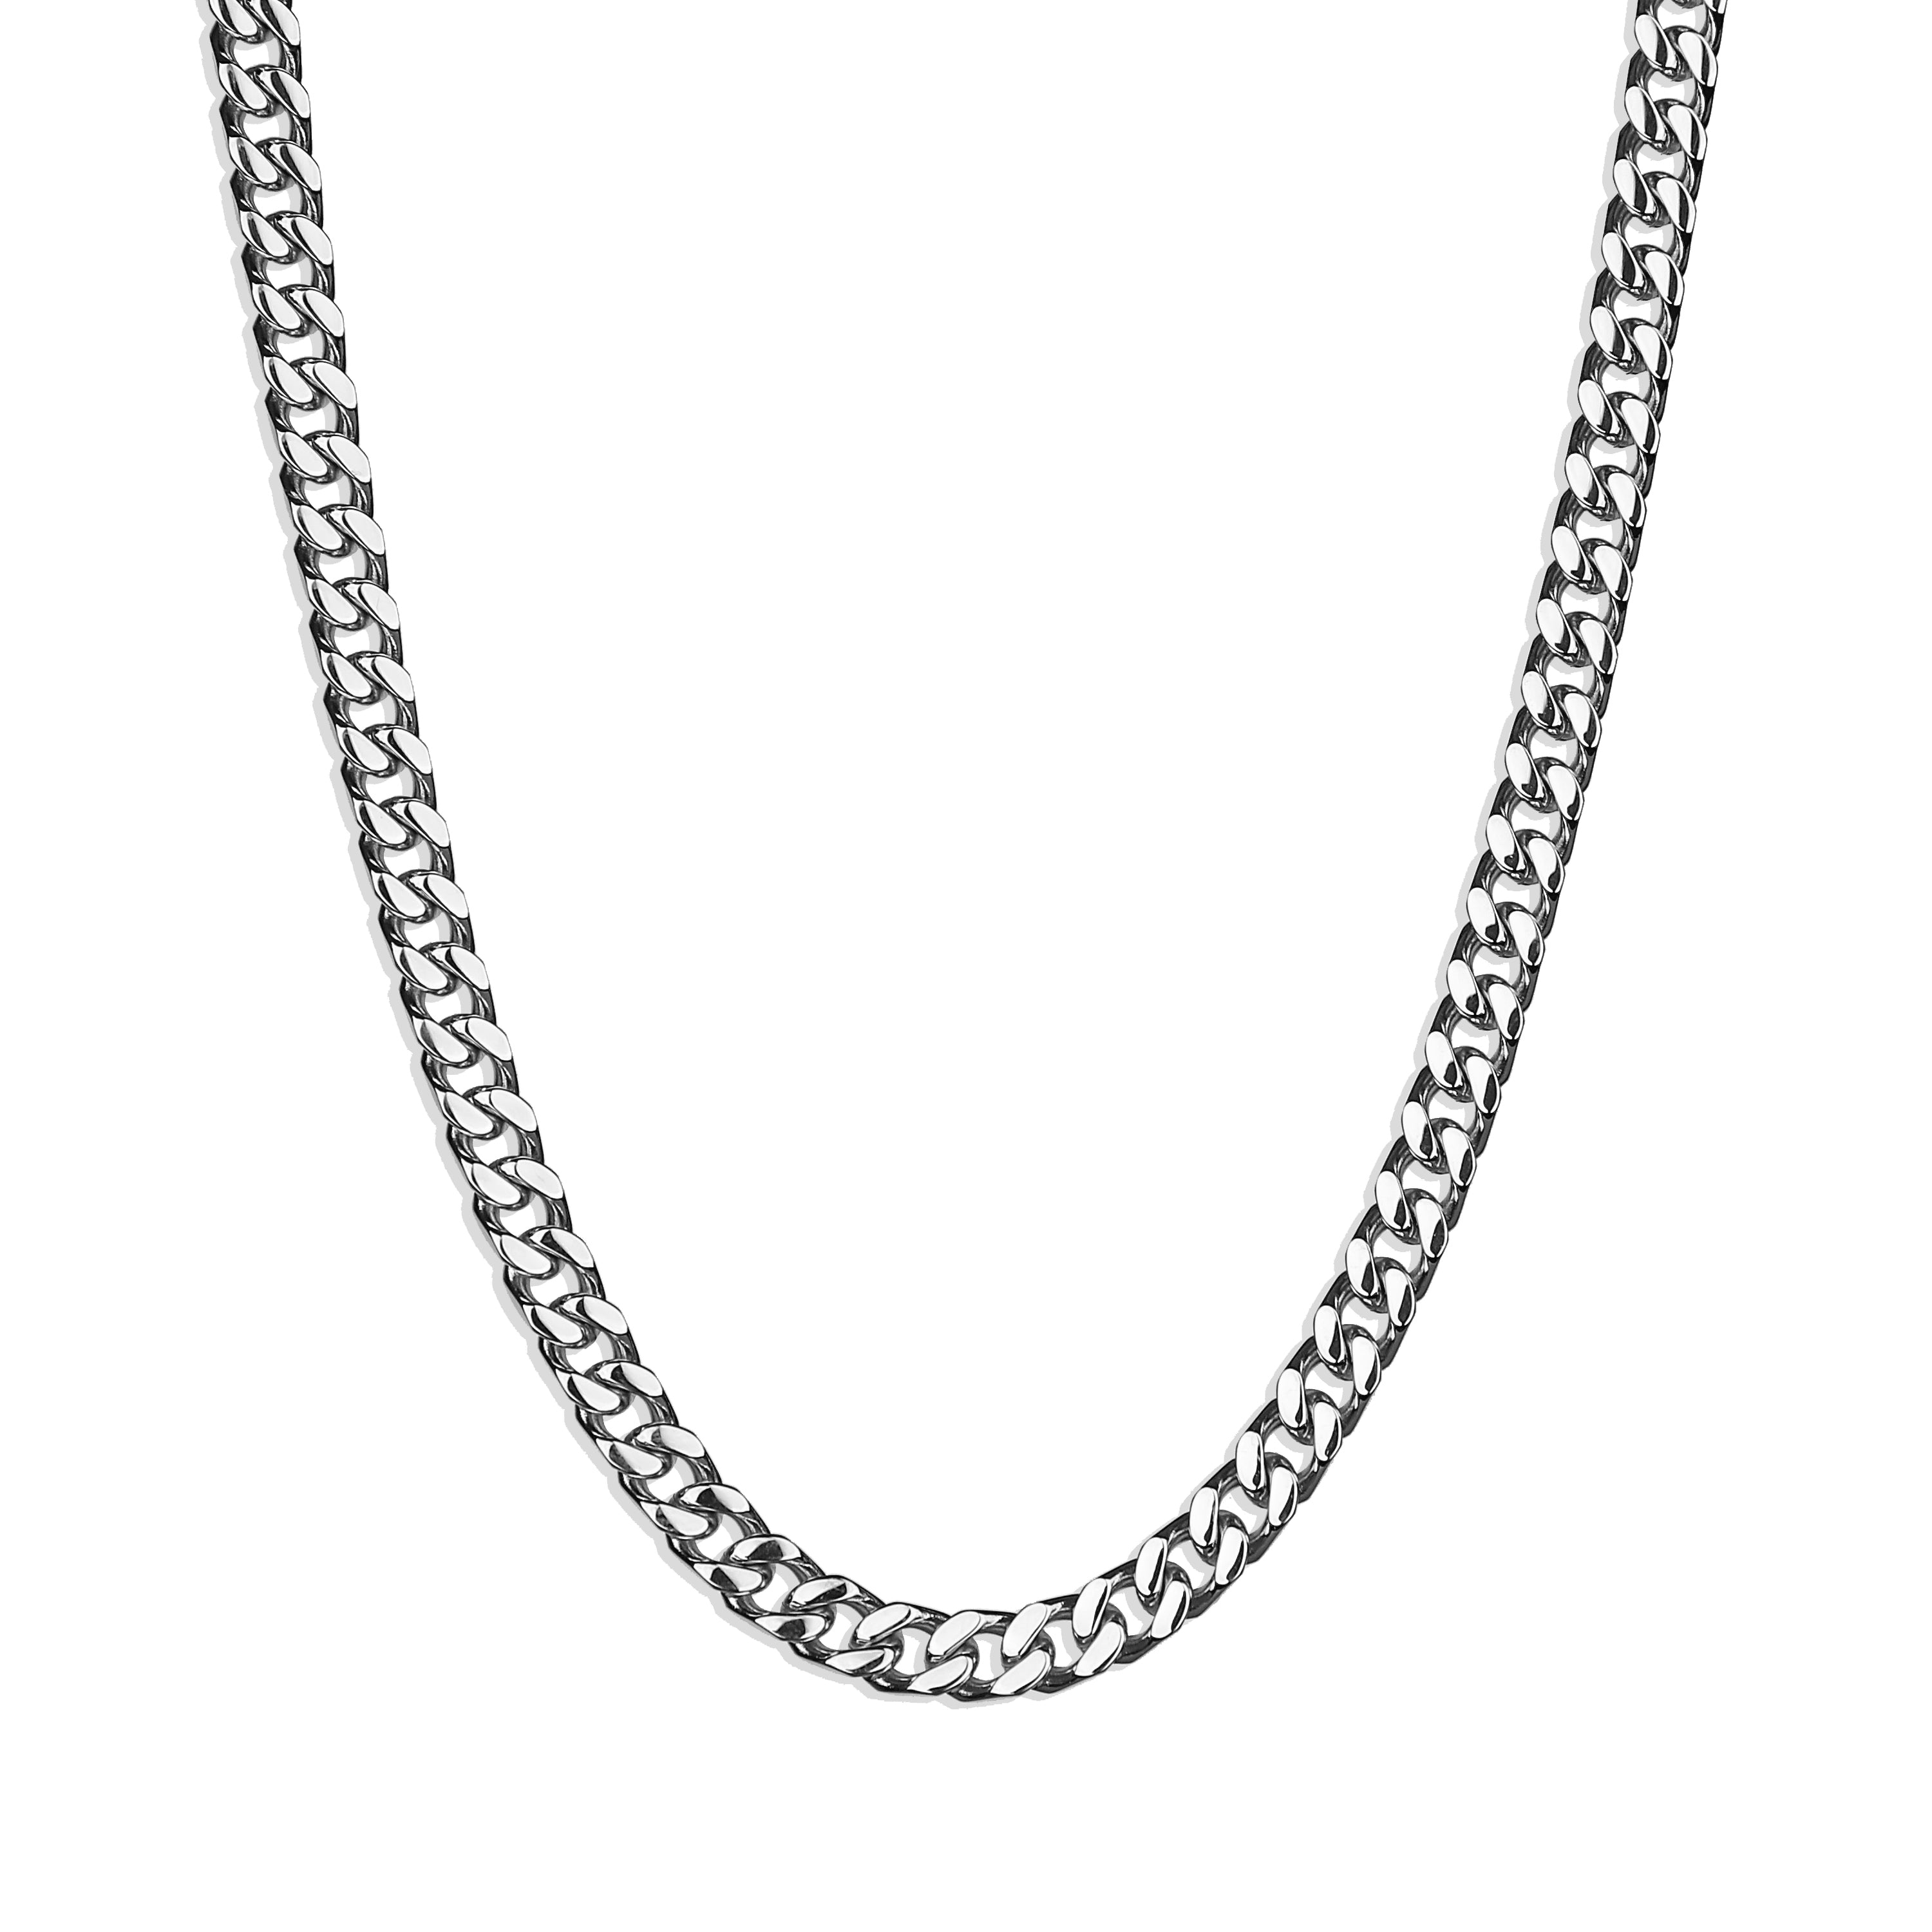 Cuban Chain Necklace - Silver 6mm